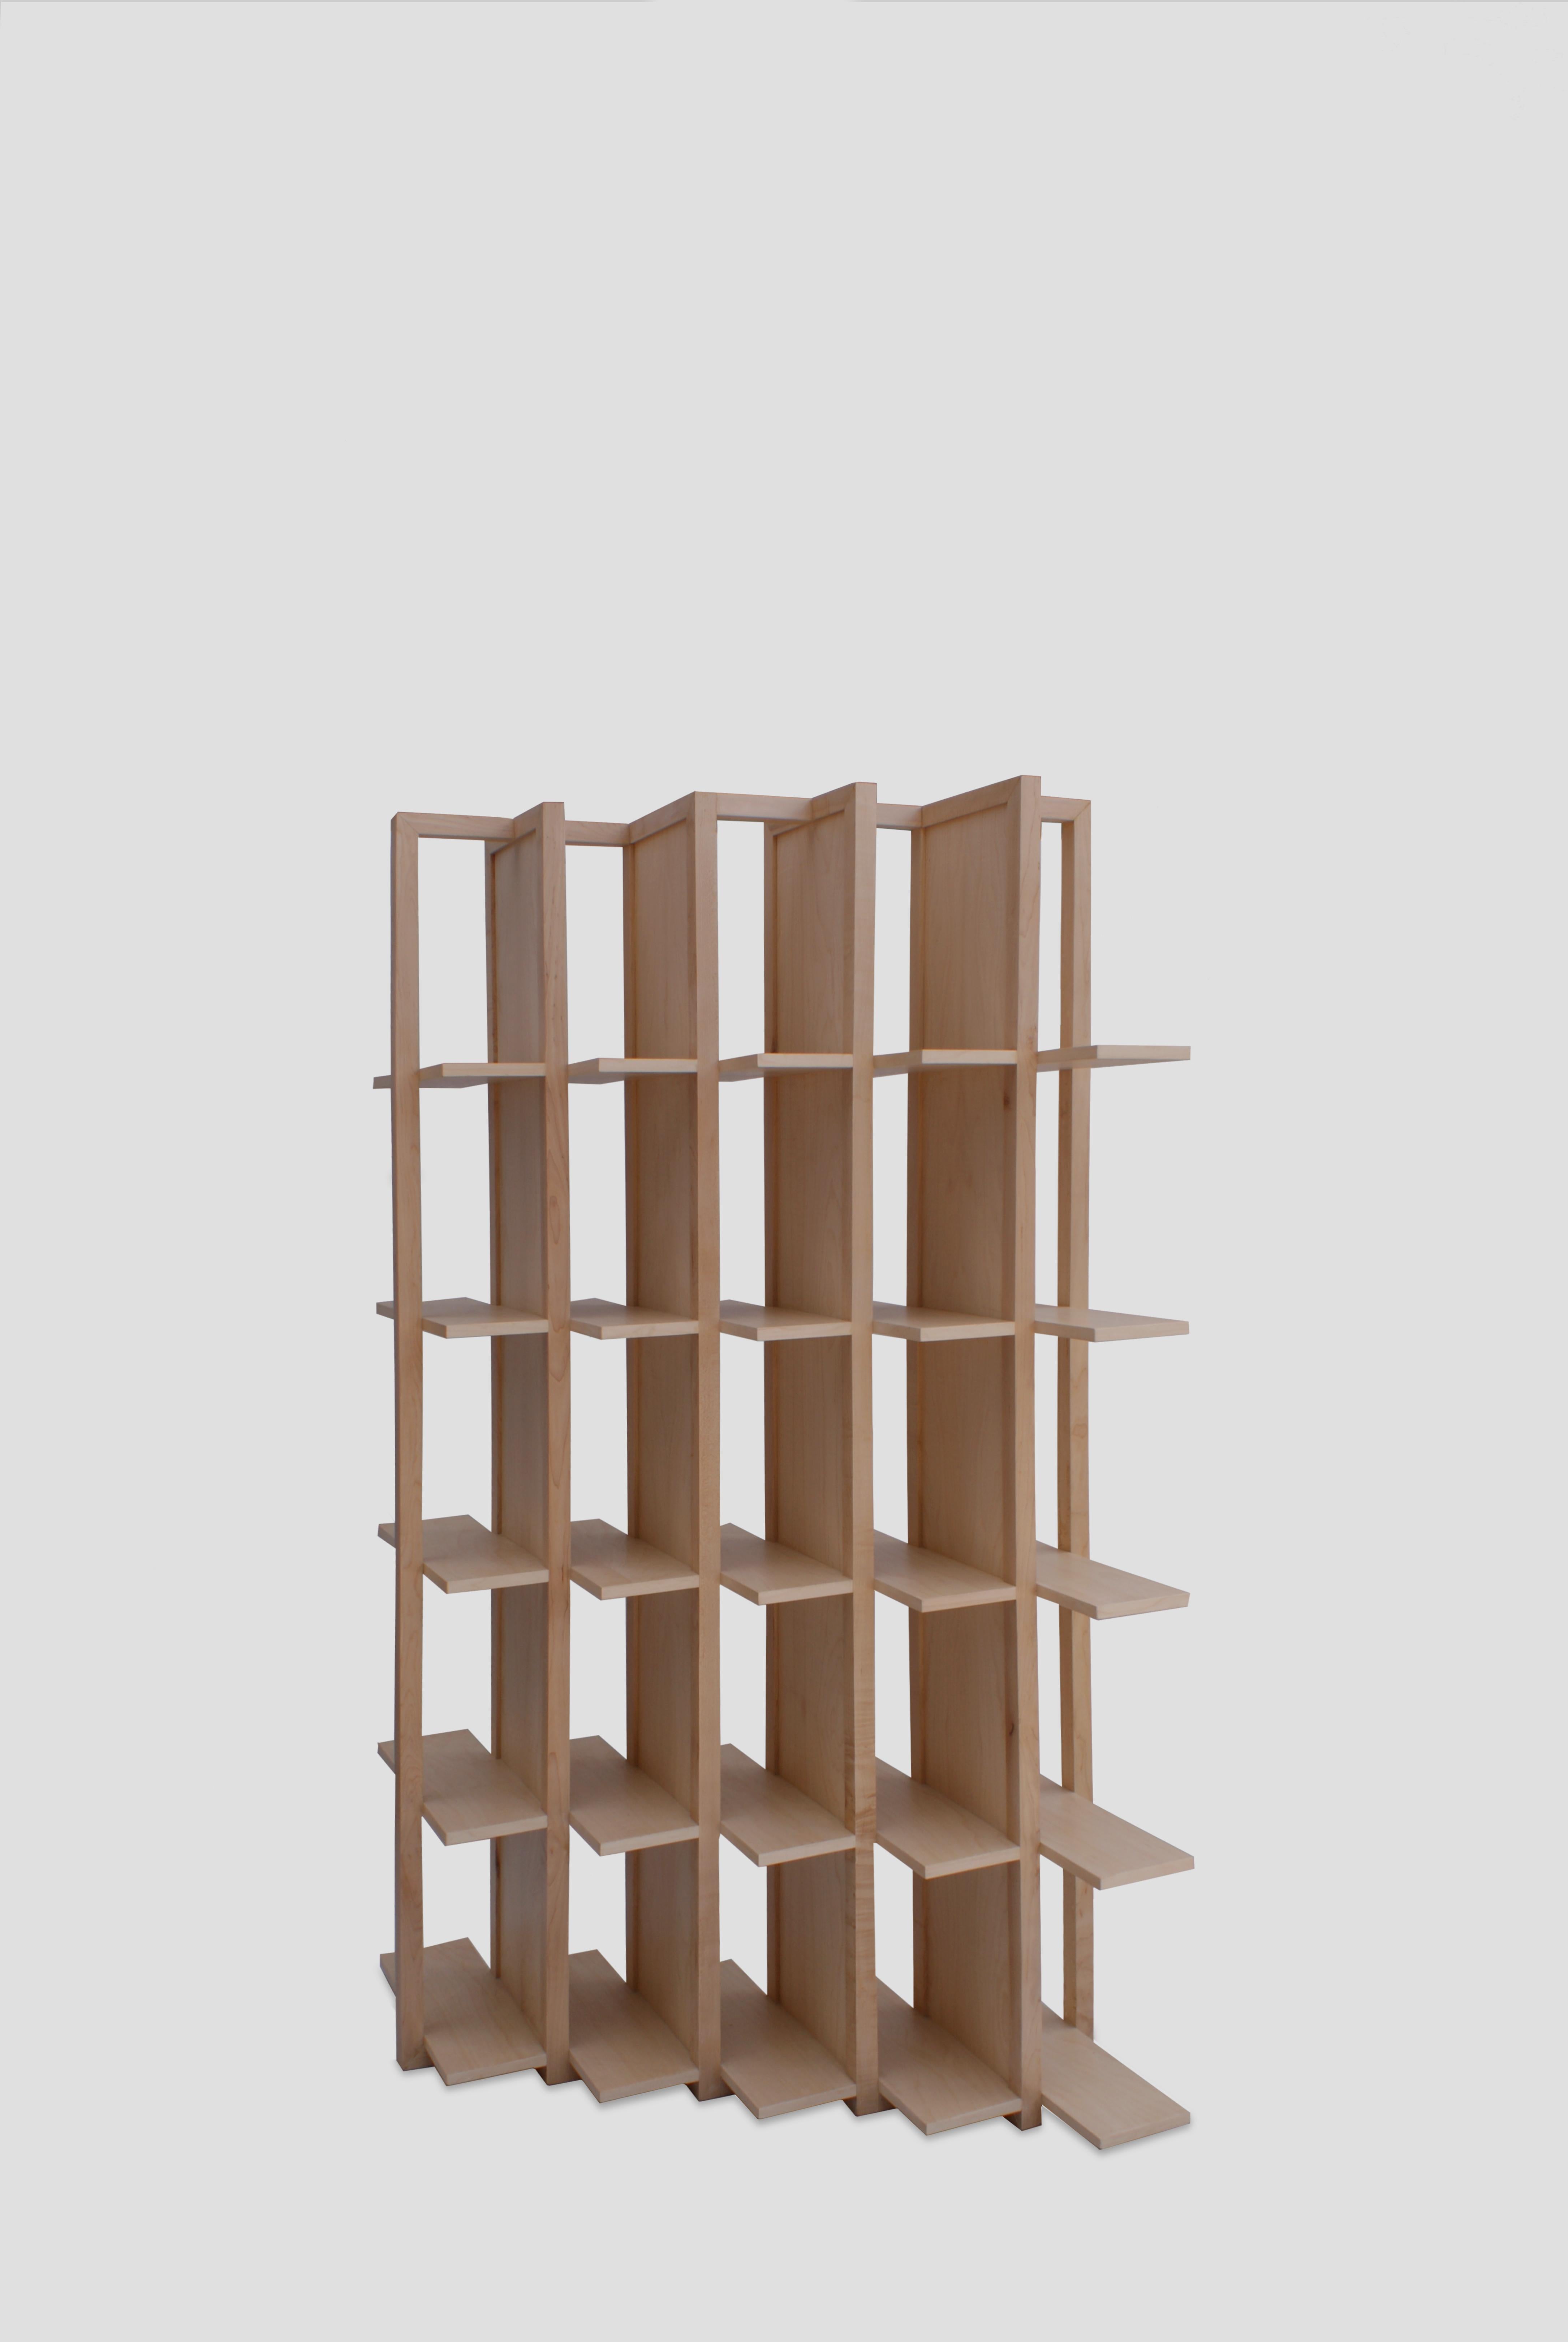 Transversal shelves by FOAM
Dimensions: D 125 x W 45 x H 200 cm
Materials: maple wood.
Available in other woods.

Bookshelf made of maple, walnut or tzalam wood.

Foam is a design and visual experimentation company in Mexico City that was